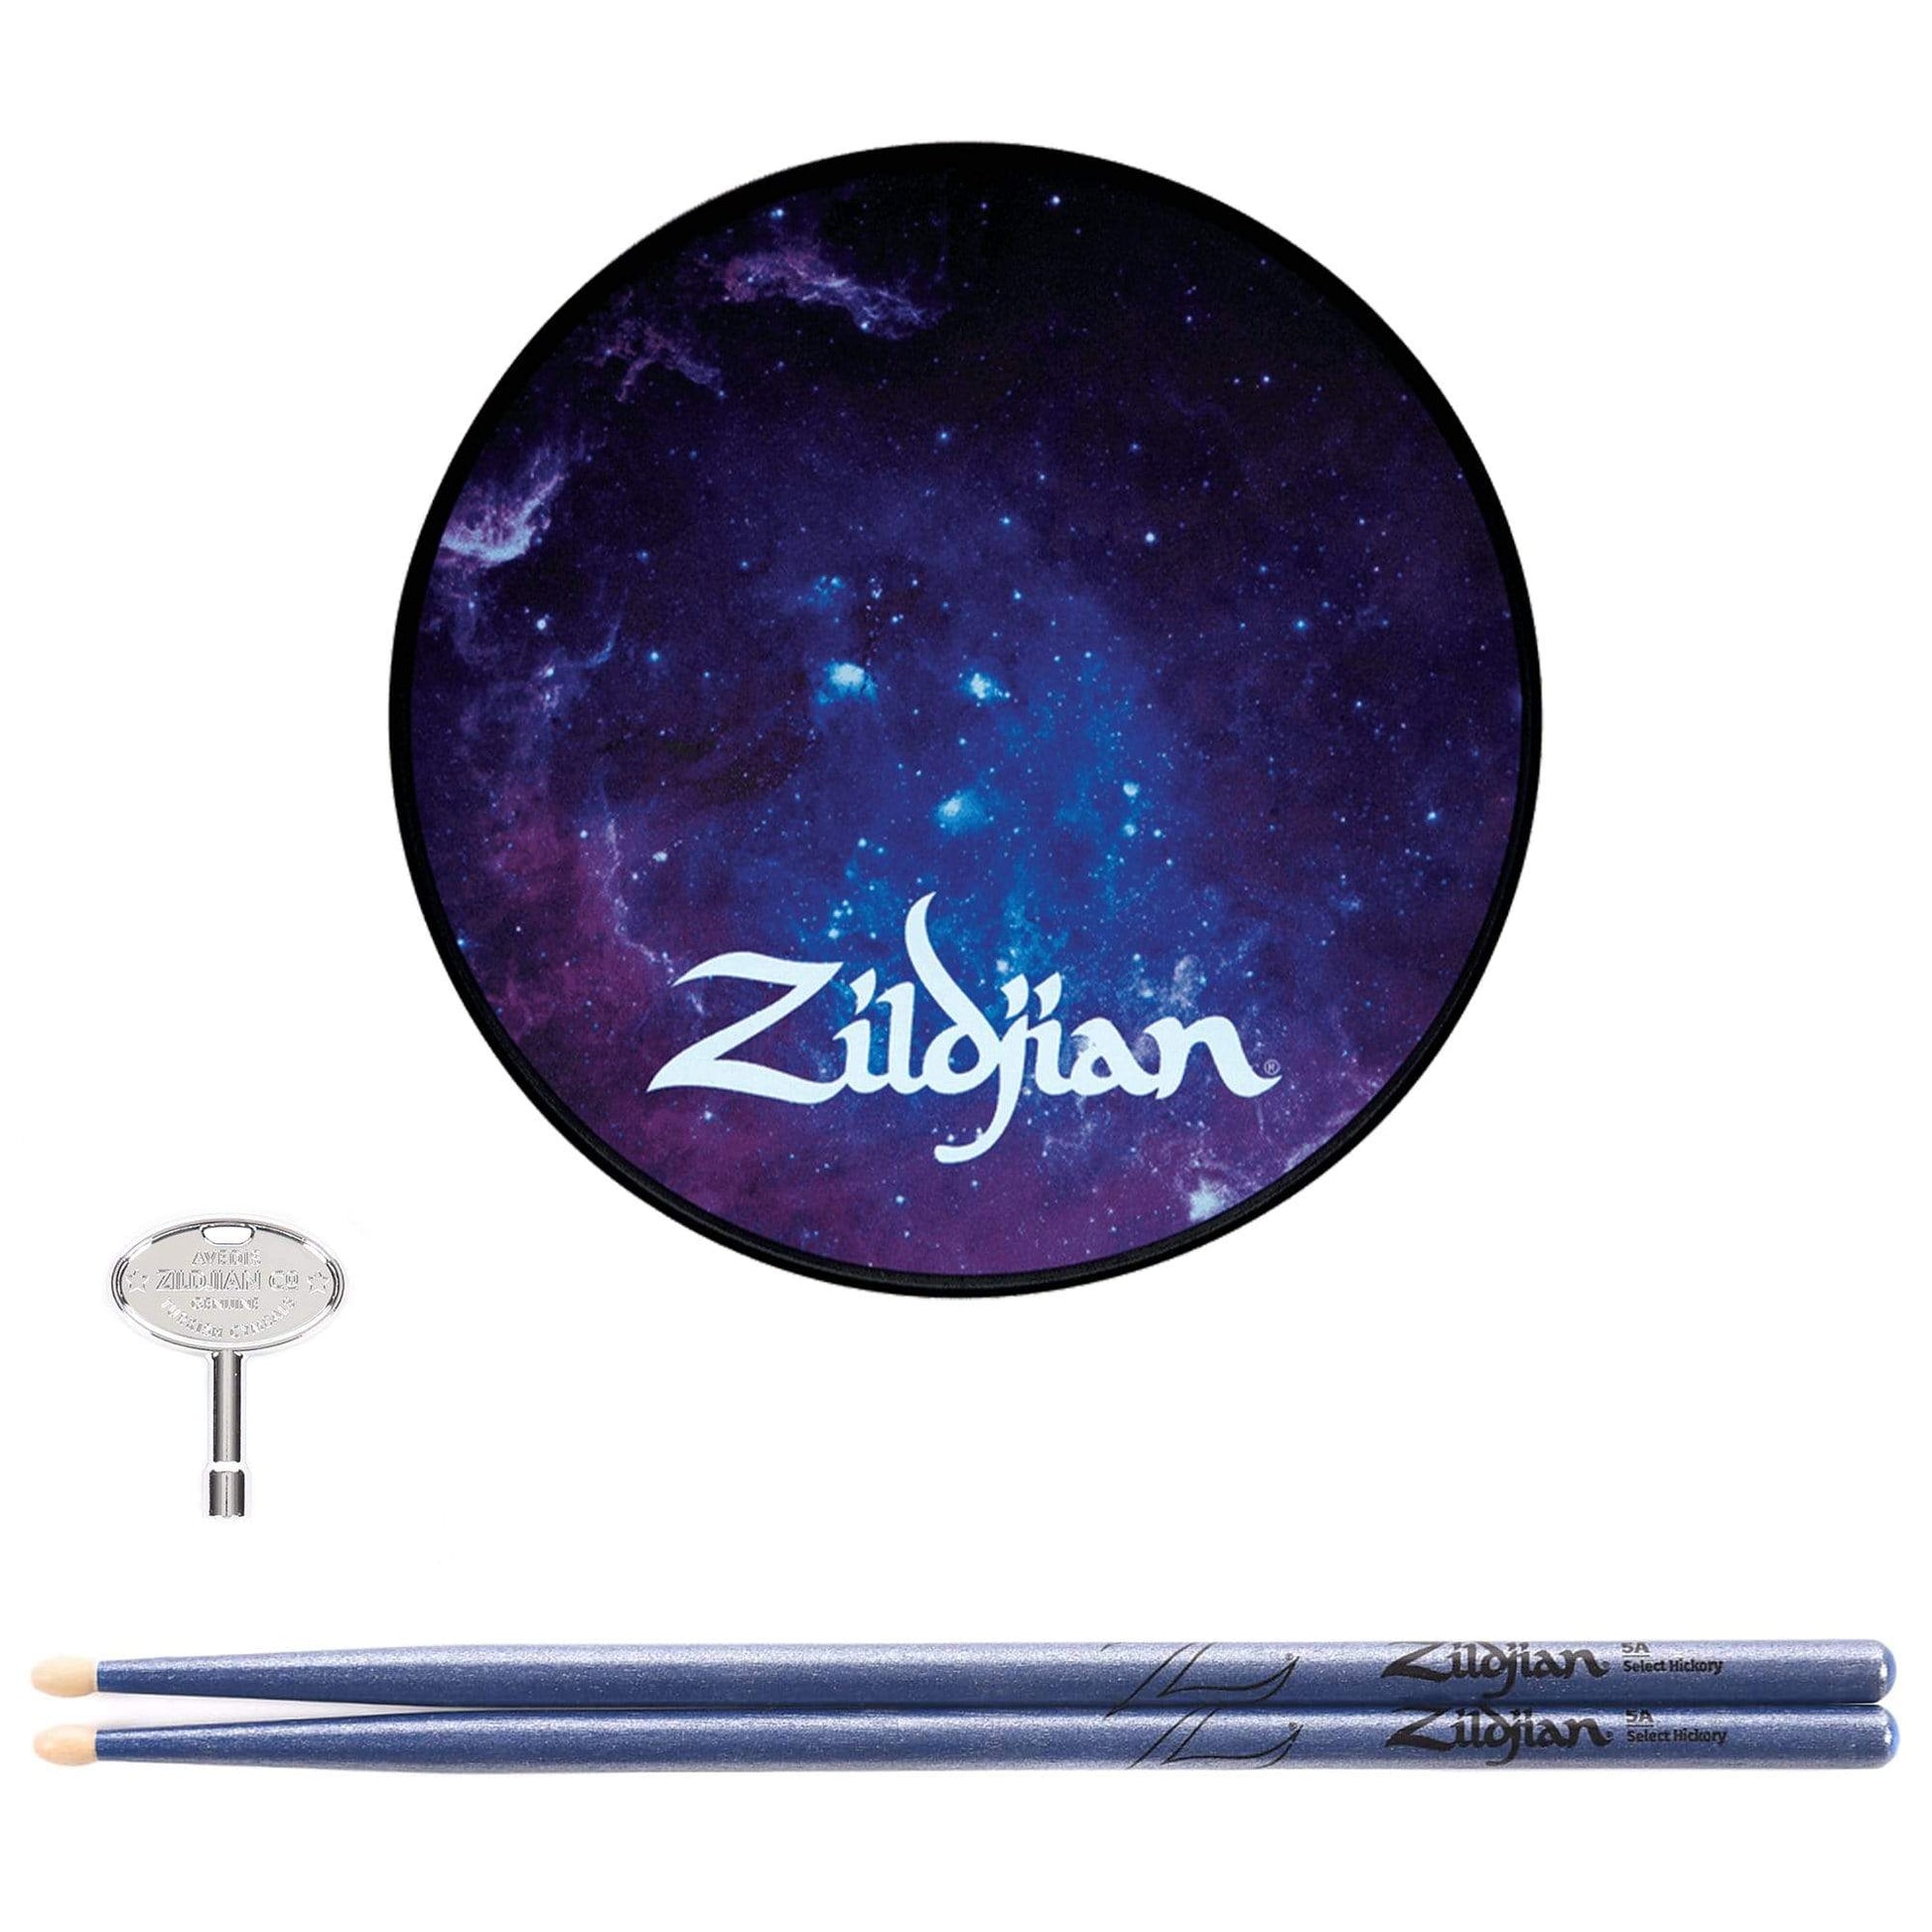 Zildjian 6" Galaxy Practice Pad, 5A Blue Chroma Drum Sticks, and Trademark Drum Key Bundle Drums and Percussion / Practice Pads